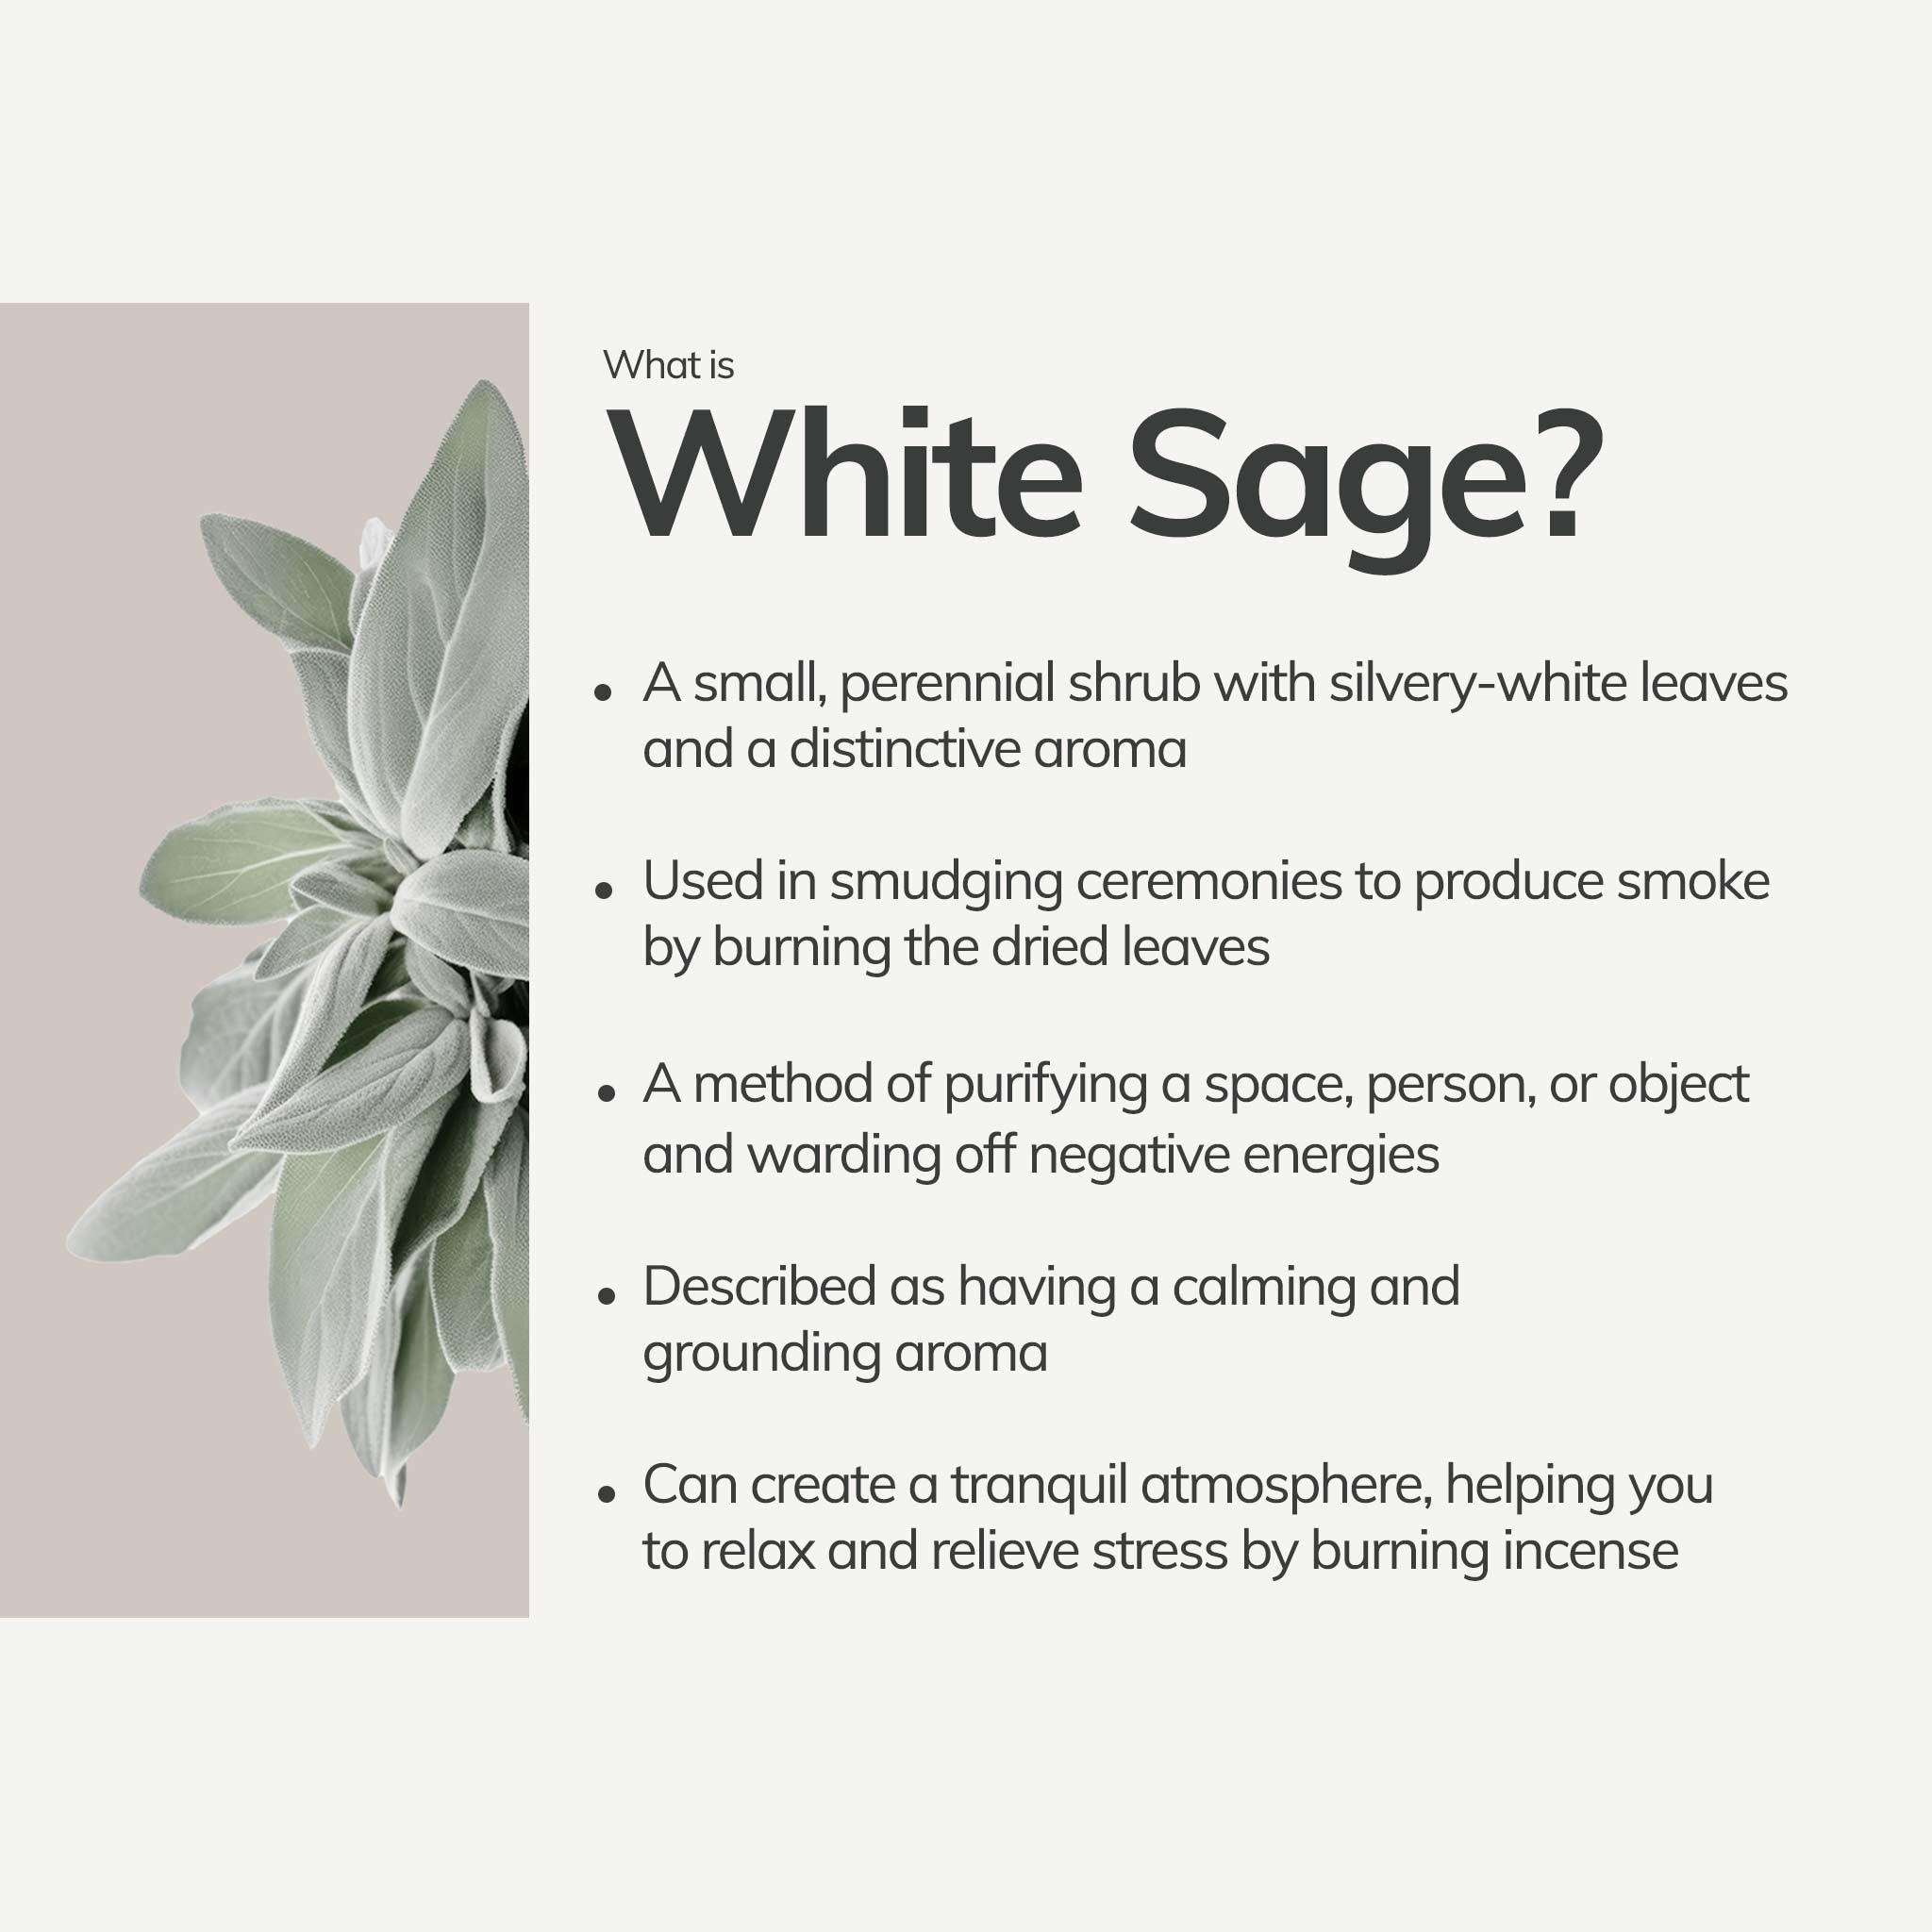 Left: white sage plant; Right: bullet list telling what is white sage plant used for.